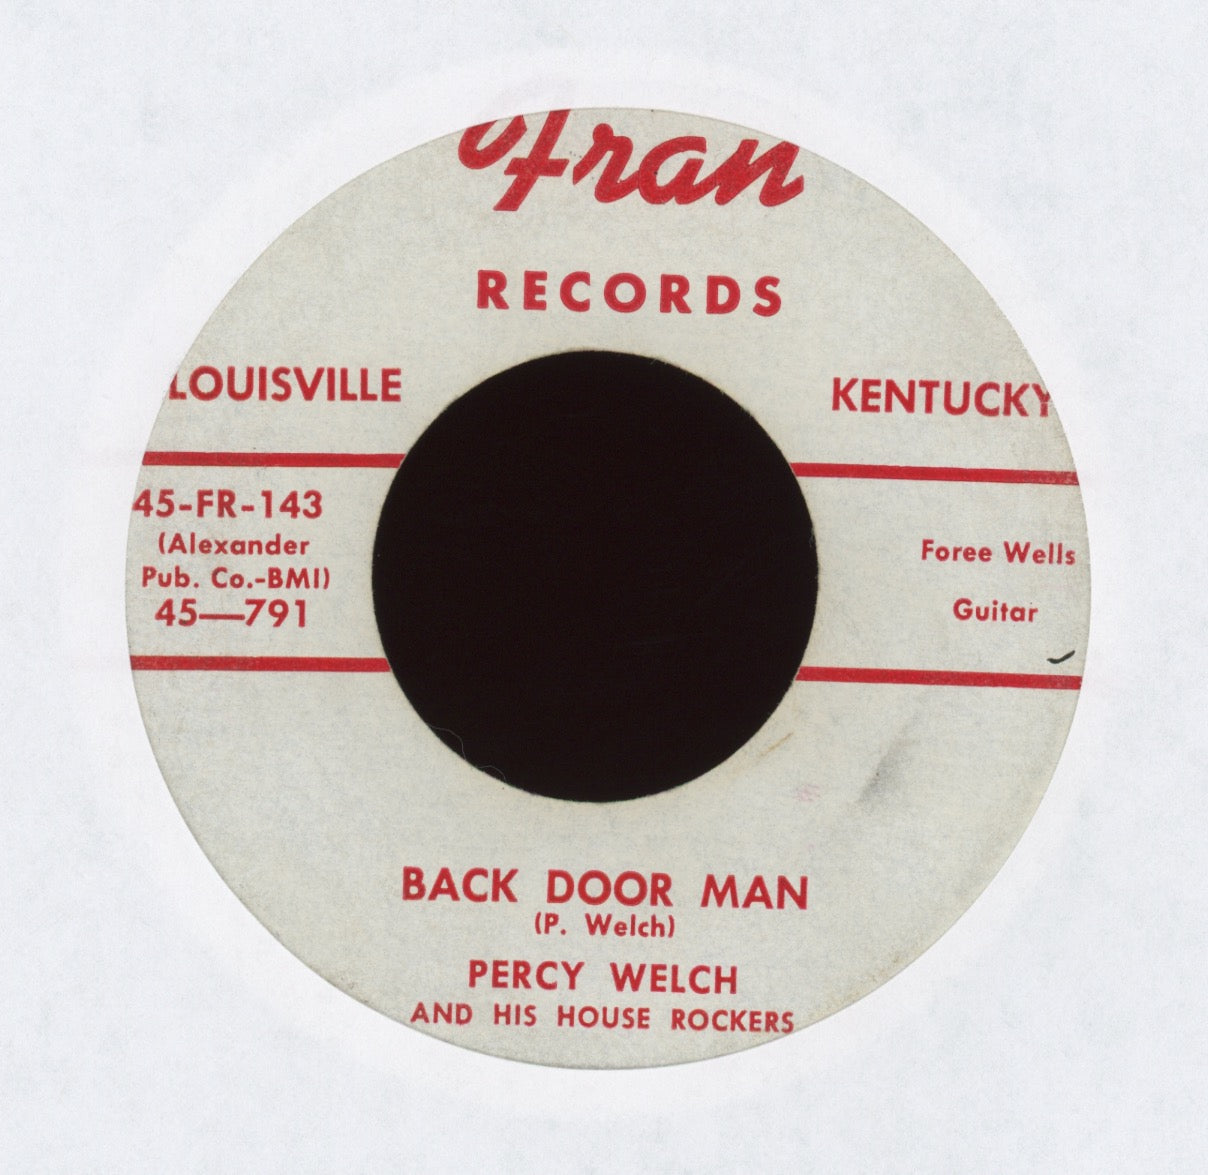 Percy Welch And His House Rockers - Back Door Man on Fran R&B Rocker 45